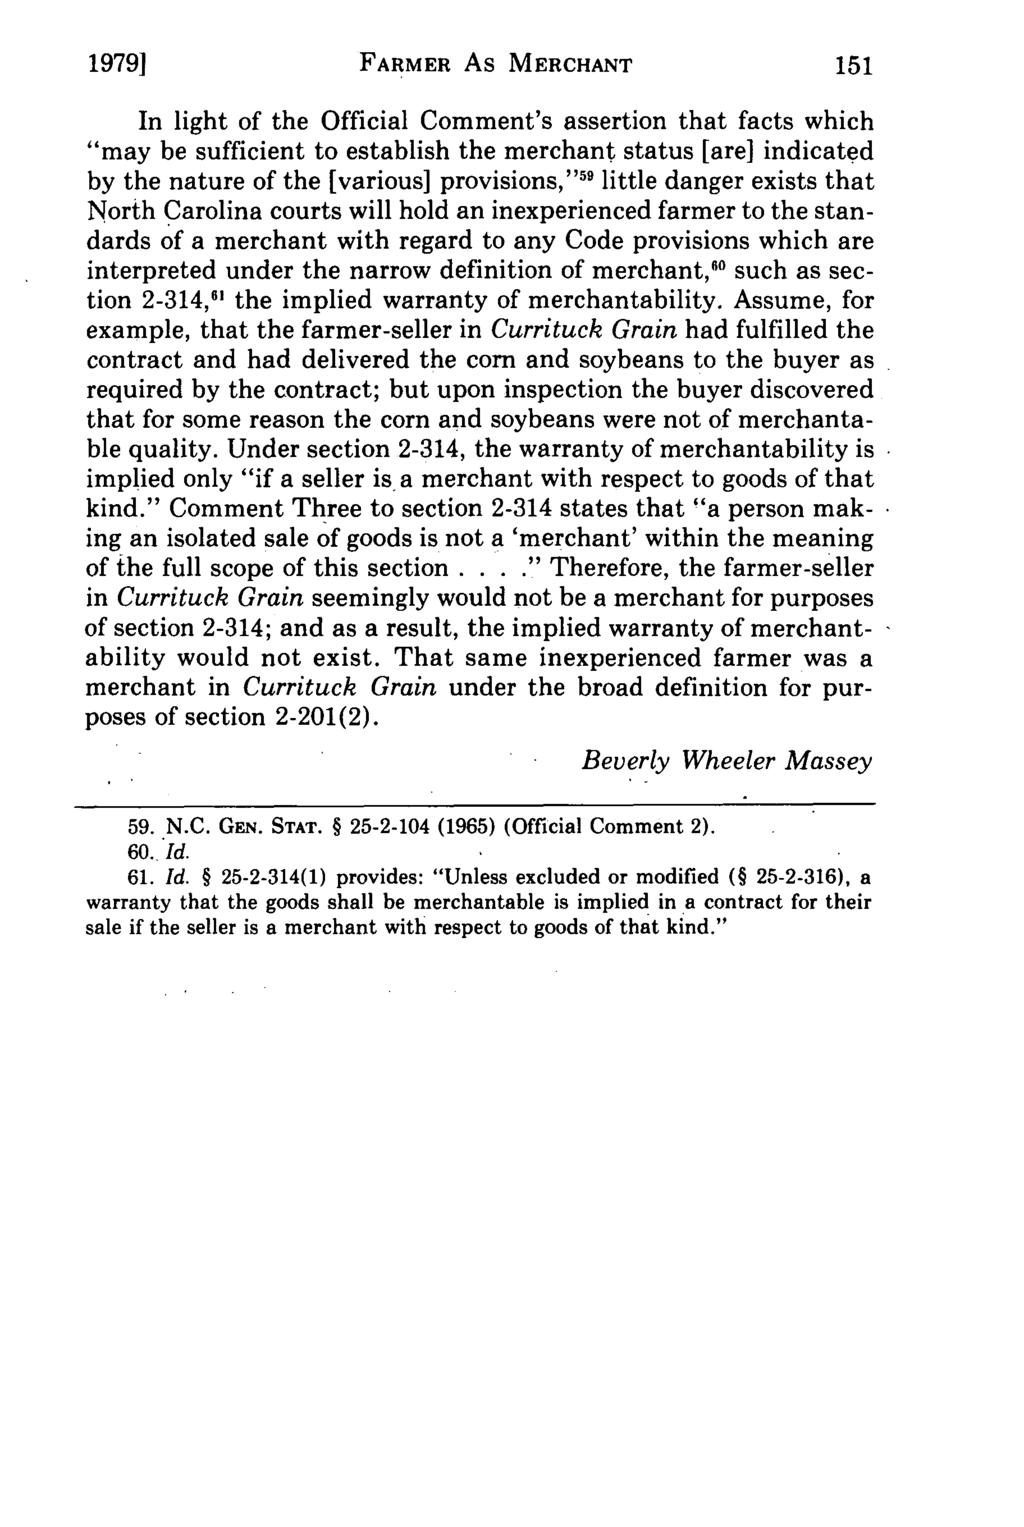 19791 Massey: Uniform Commercial FARMER Code As - Farmers MERCHANT as Merchants in North Carolina In light of the Official Comment's assertion that facts which "may be sufficient to establish the